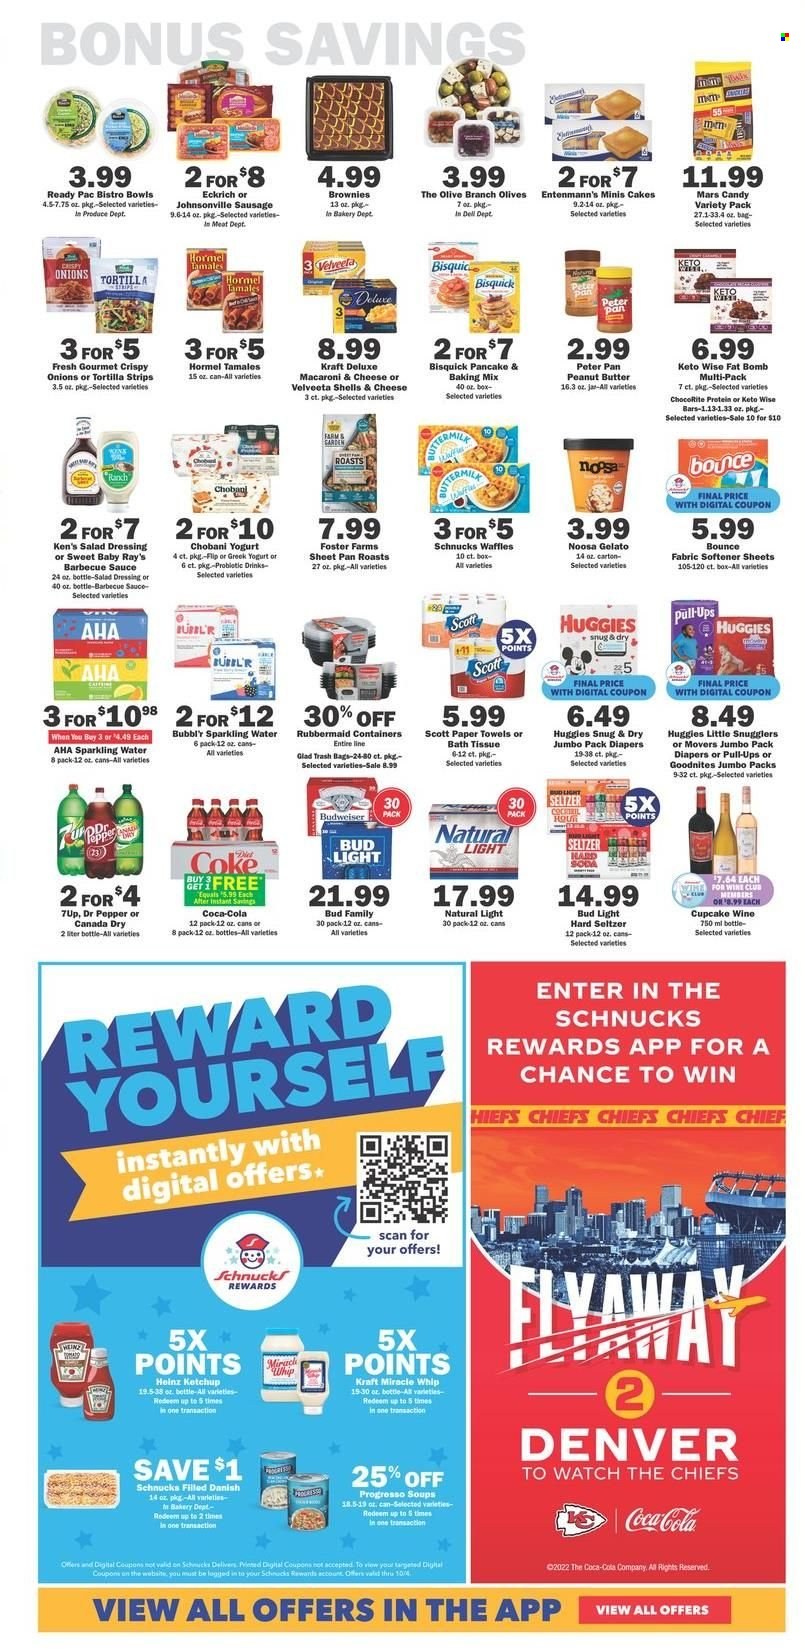 thumbnail - Schnucks Flyer - 09/28/2022 - 10/04/2022 - Sales products - tortillas, cake, brownies, waffles, Entenmann's, onion, macaroni & cheese, sauce, pancakes, Progresso, Ready Pac, Kraft®, Hormel, Johnsonville, sausage, greek yoghurt, yoghurt, Chobani, Miracle Whip, gelato, Mars, Bisquick, baking mix, Heinz, olives, BBQ sauce, salad dressing, ketchup, dressing, peanut butter, Canada Dry, Coca-Cola, Dr. Pepper, 7UP, soda, sparkling water, Cupcake Vineyards, Hard Seltzer, beer, Bud Light, Huggies, nappies, bath tissue, Scott, kitchen towels, paper towels, fabric softener, Bounce, Budweiser. Page 5.